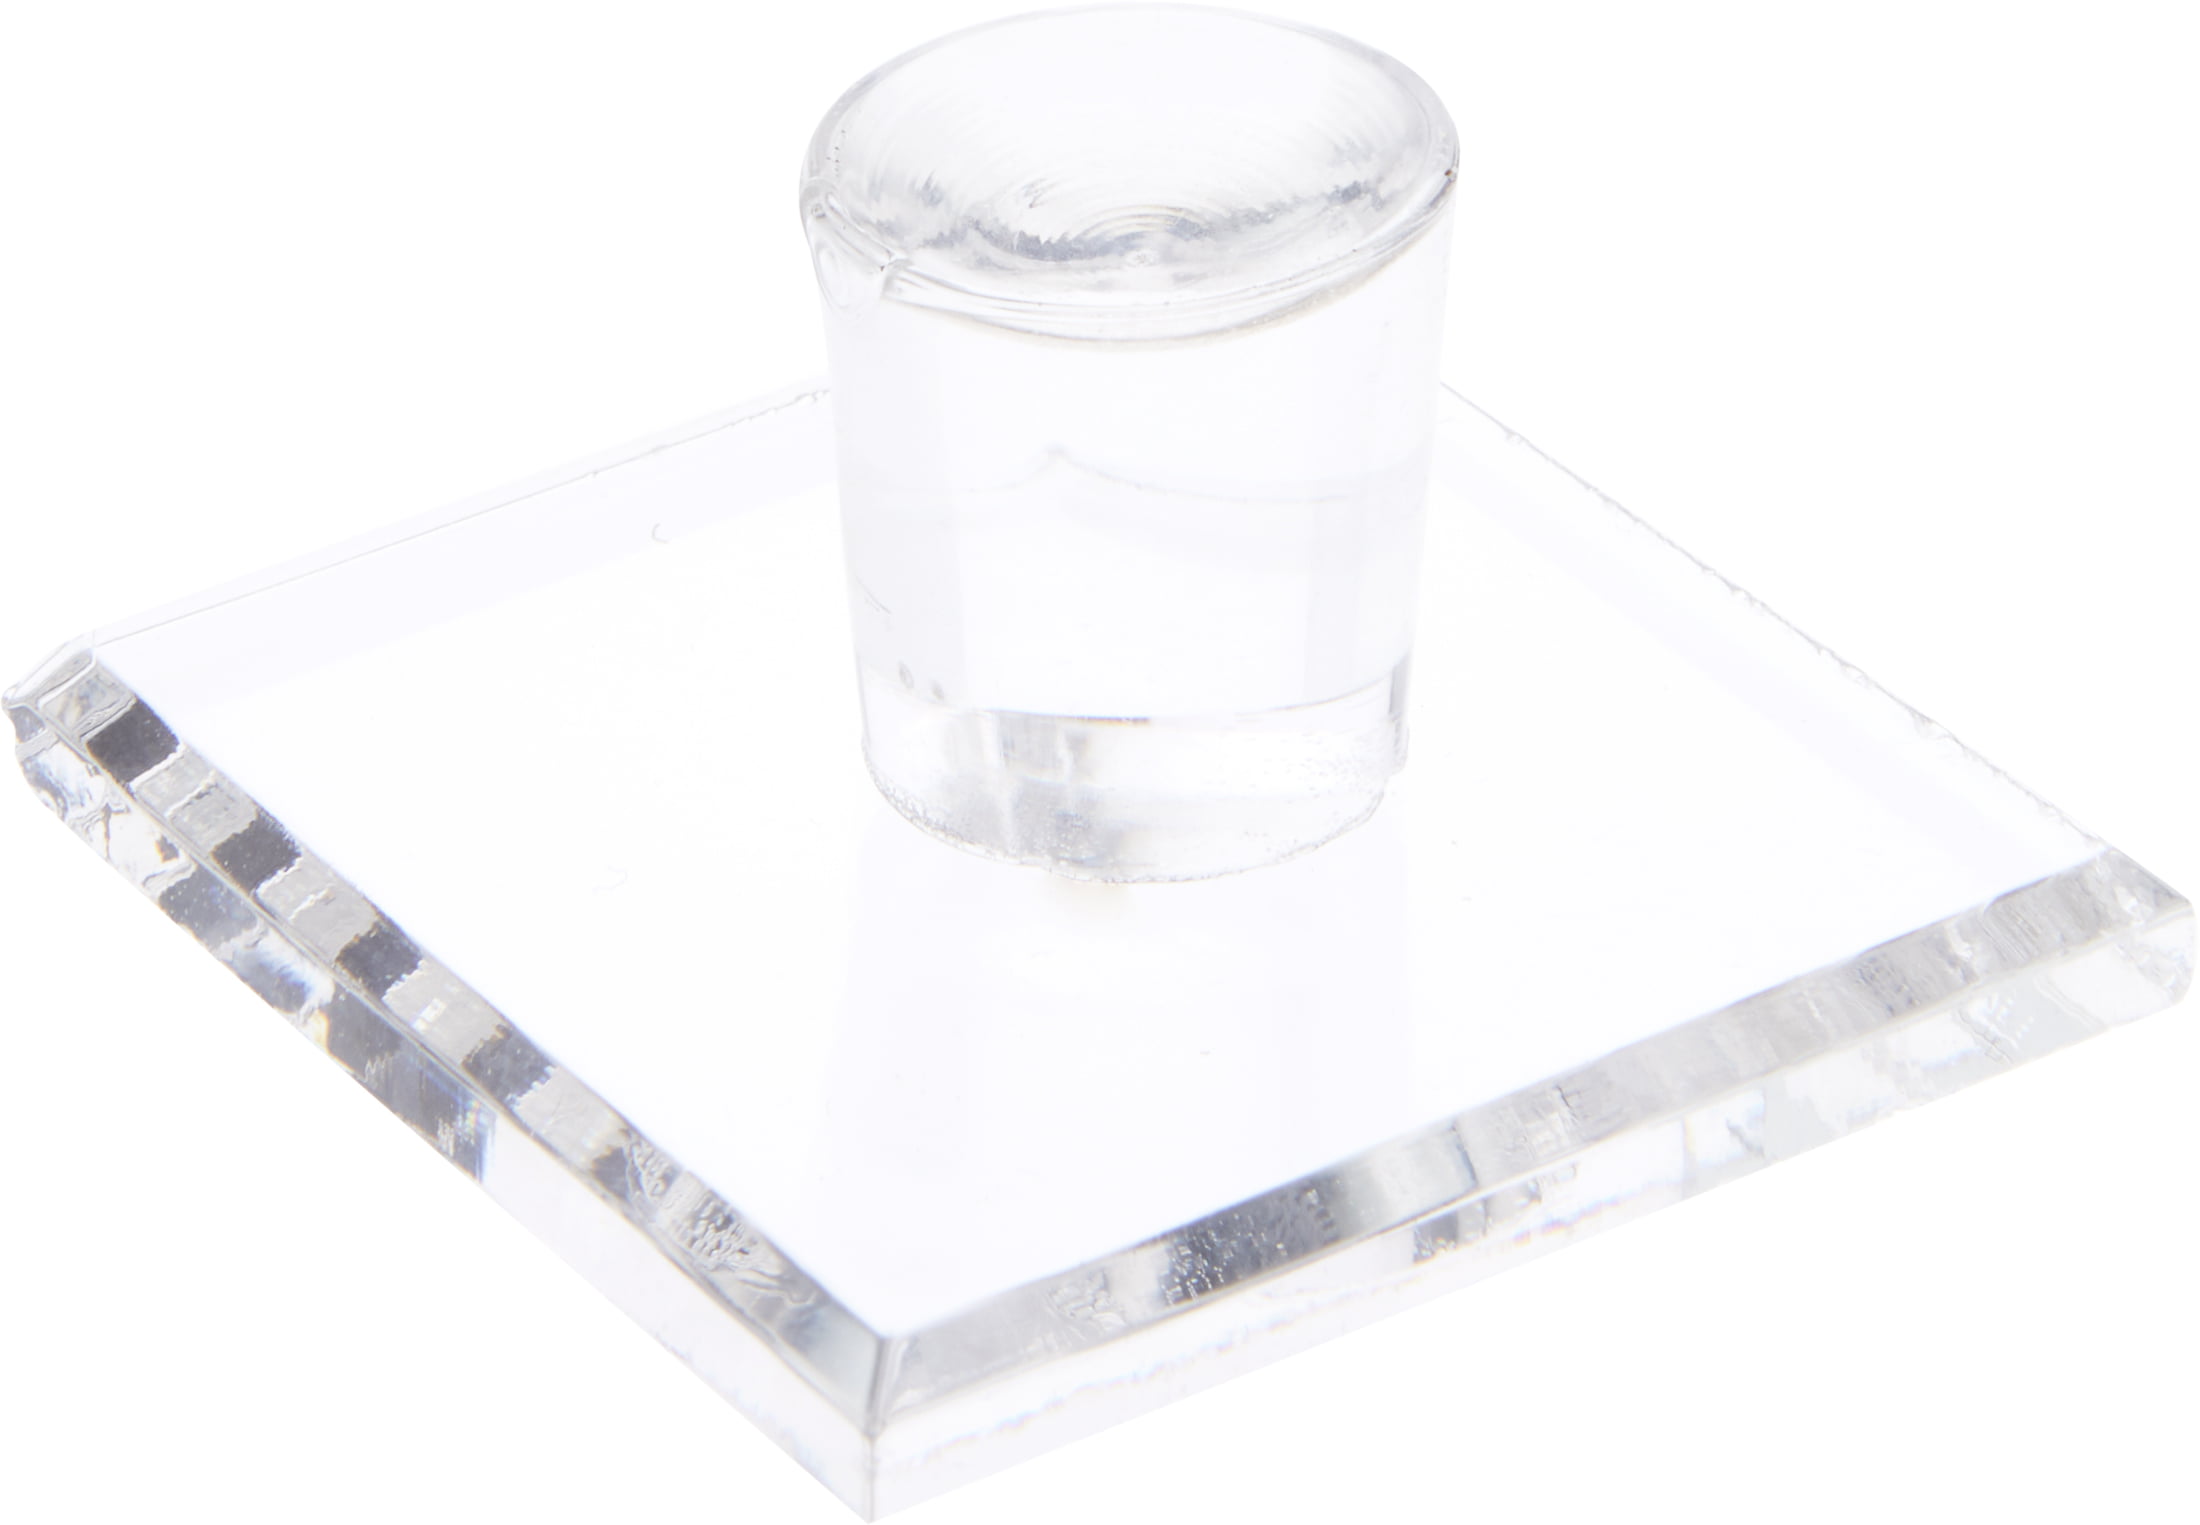 Plymor Clear Acrylic Round Cylinder Display Riser 4" H x 7" D 